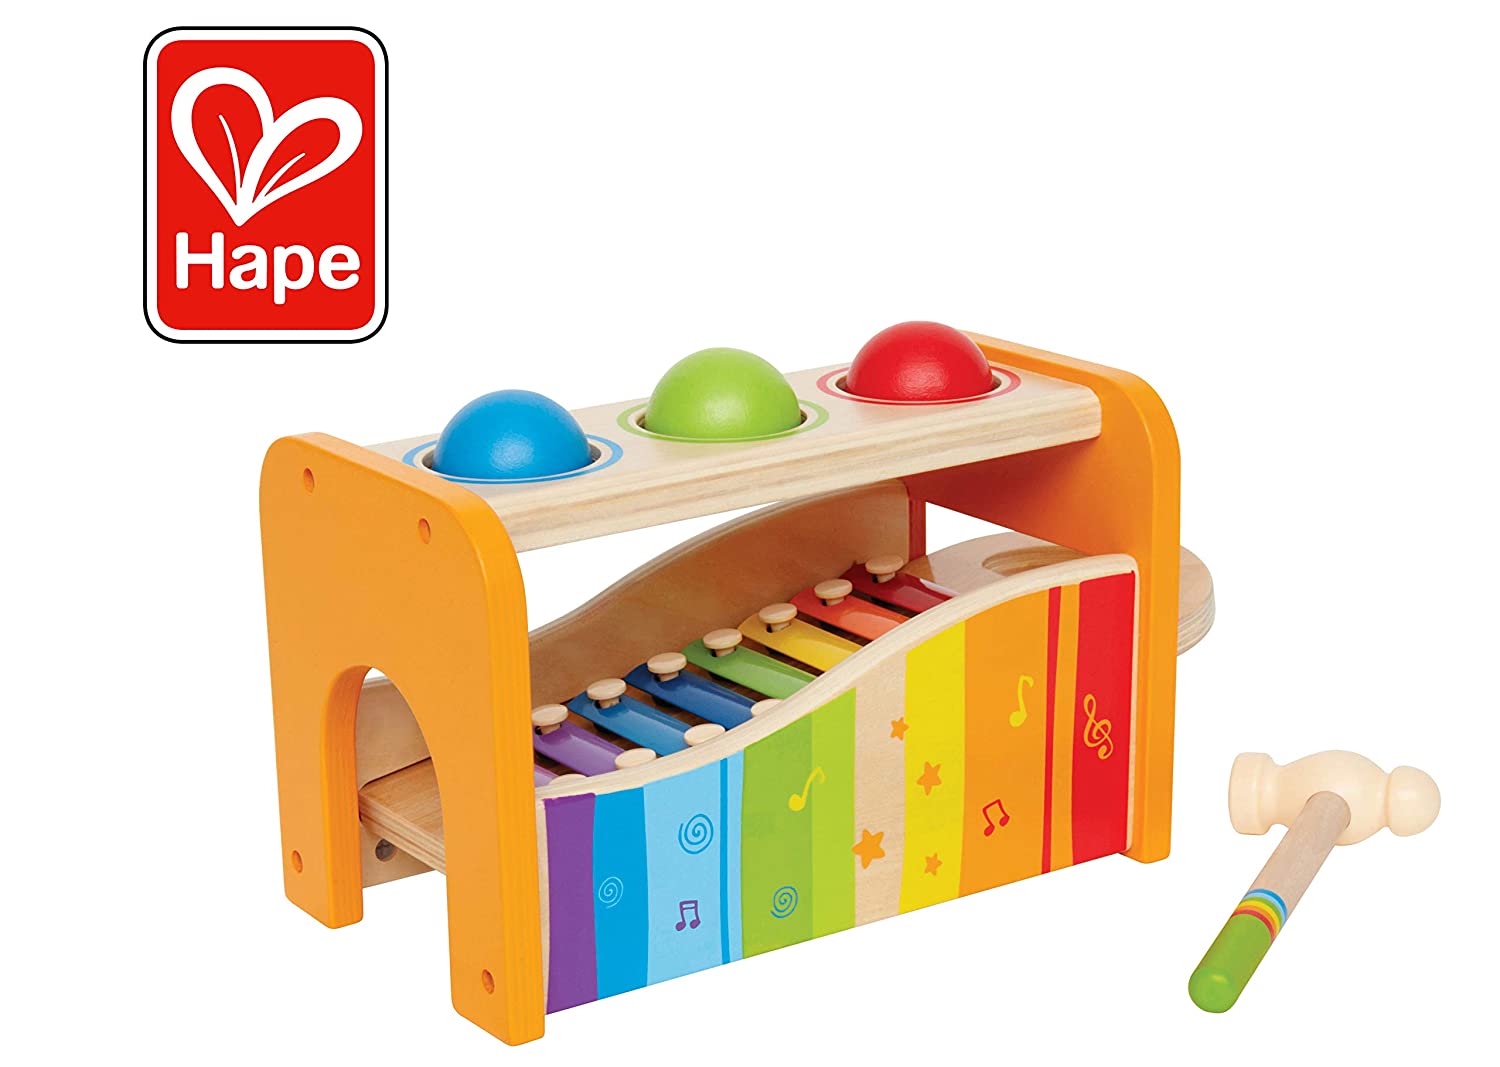 7 Best Babies Xylophone 2022 - Buying Guide & Reviews 2